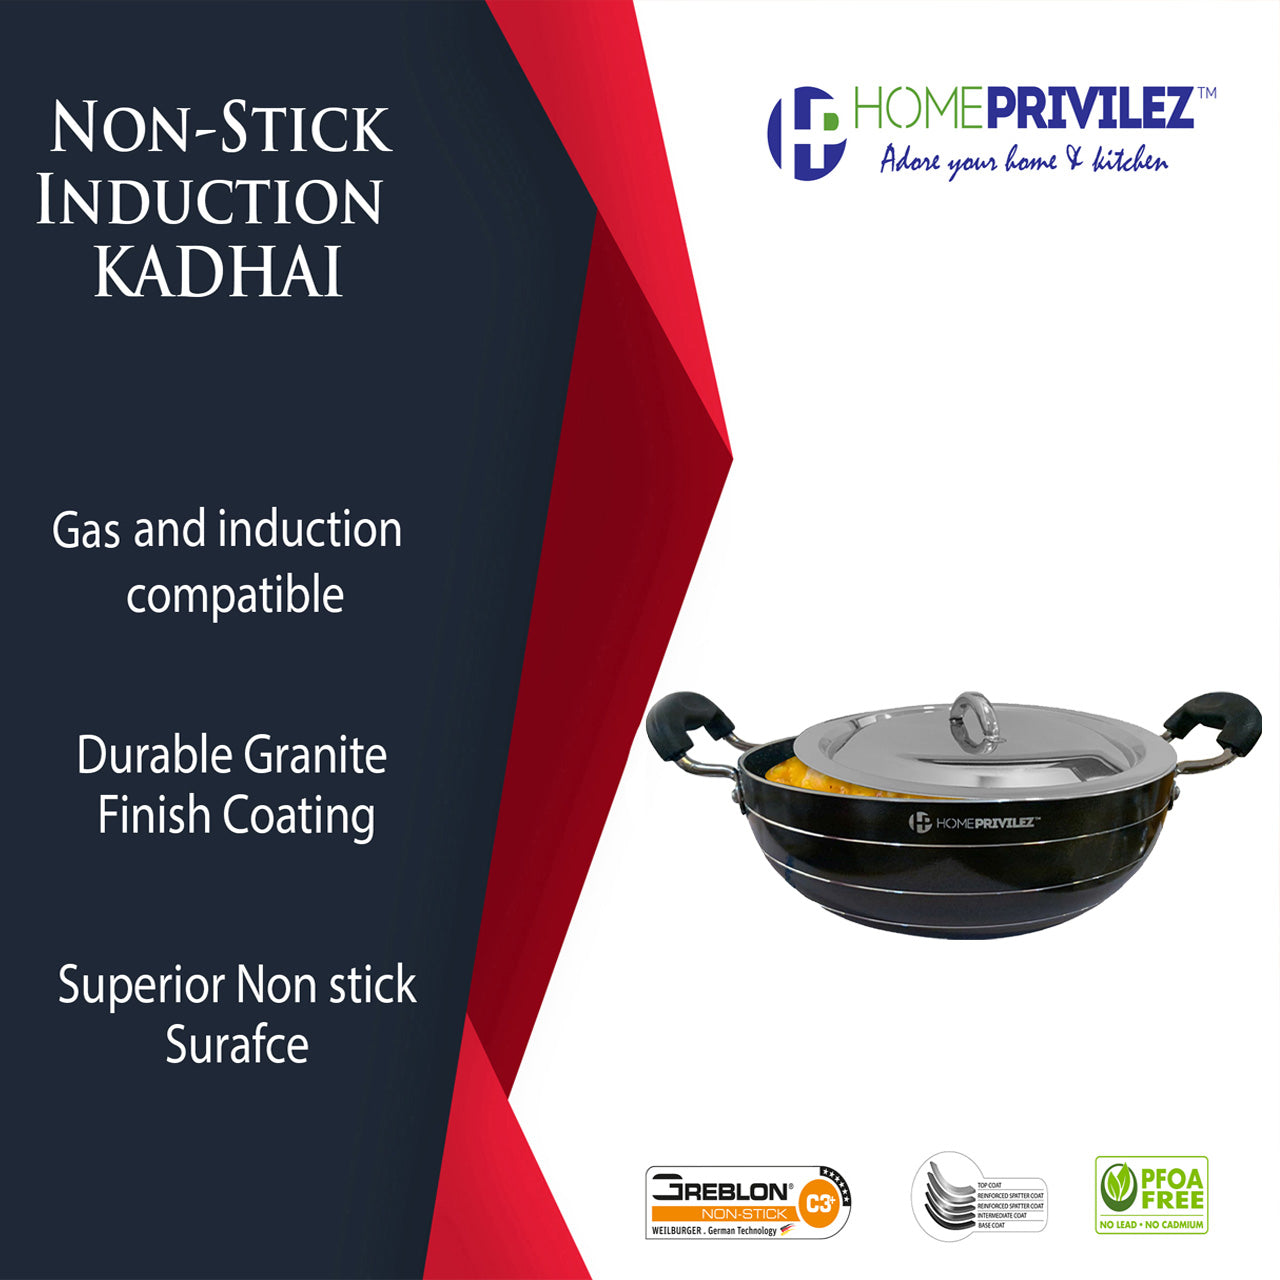 Non-Stick Induction KADHAI (5-layer granite coating) with SS Lid